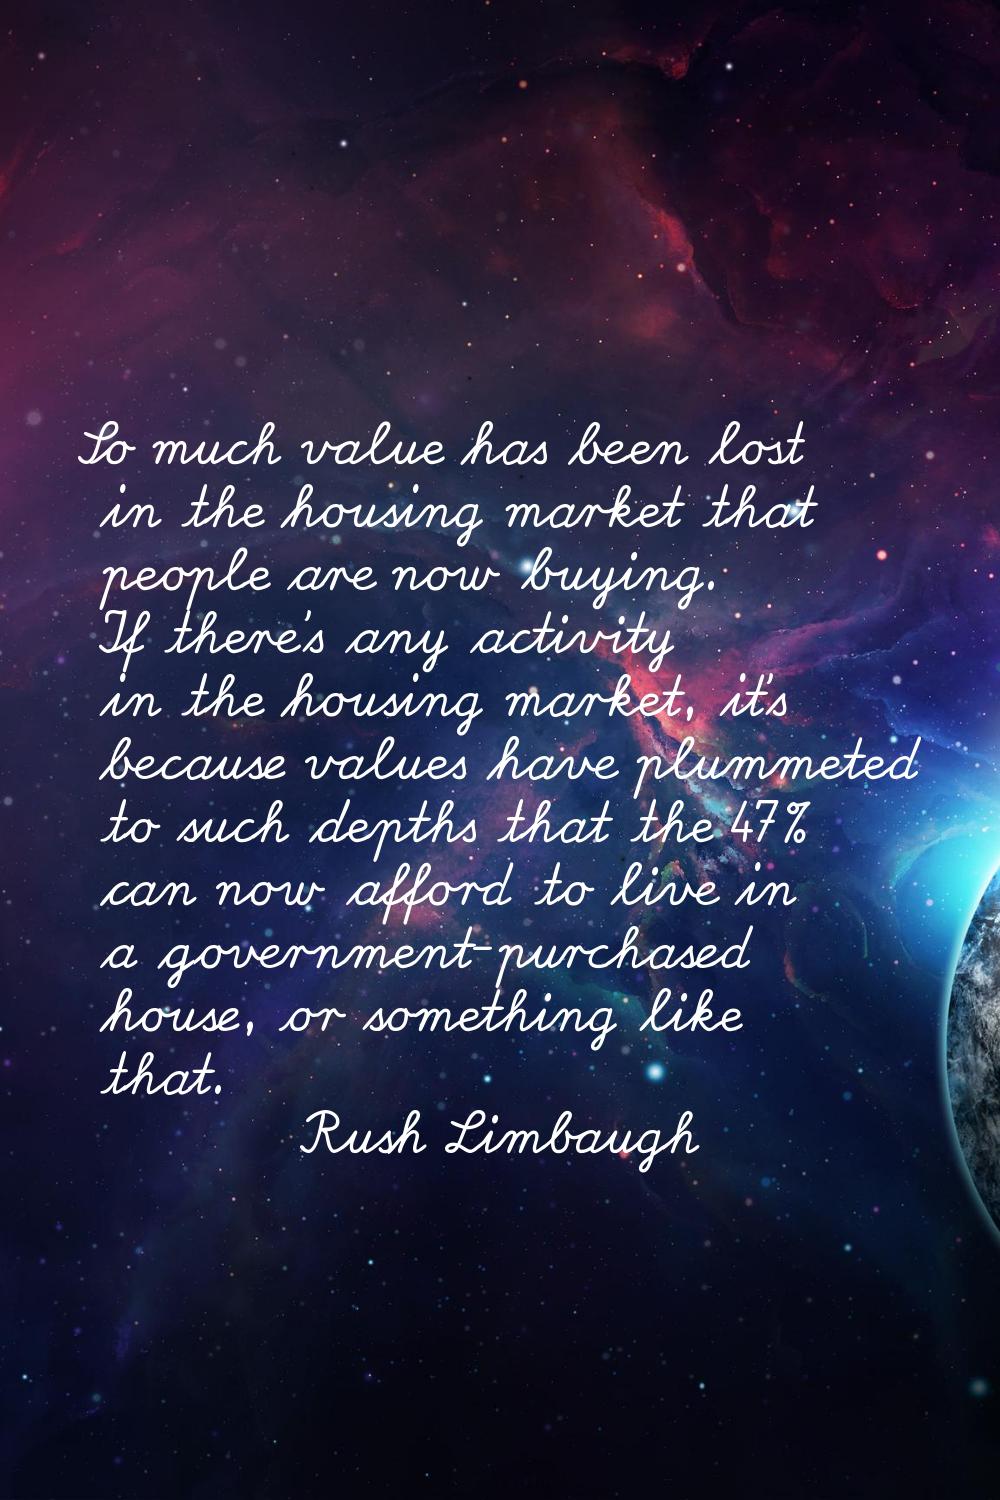 So much value has been lost in the housing market that people are now buying. If there's any activi